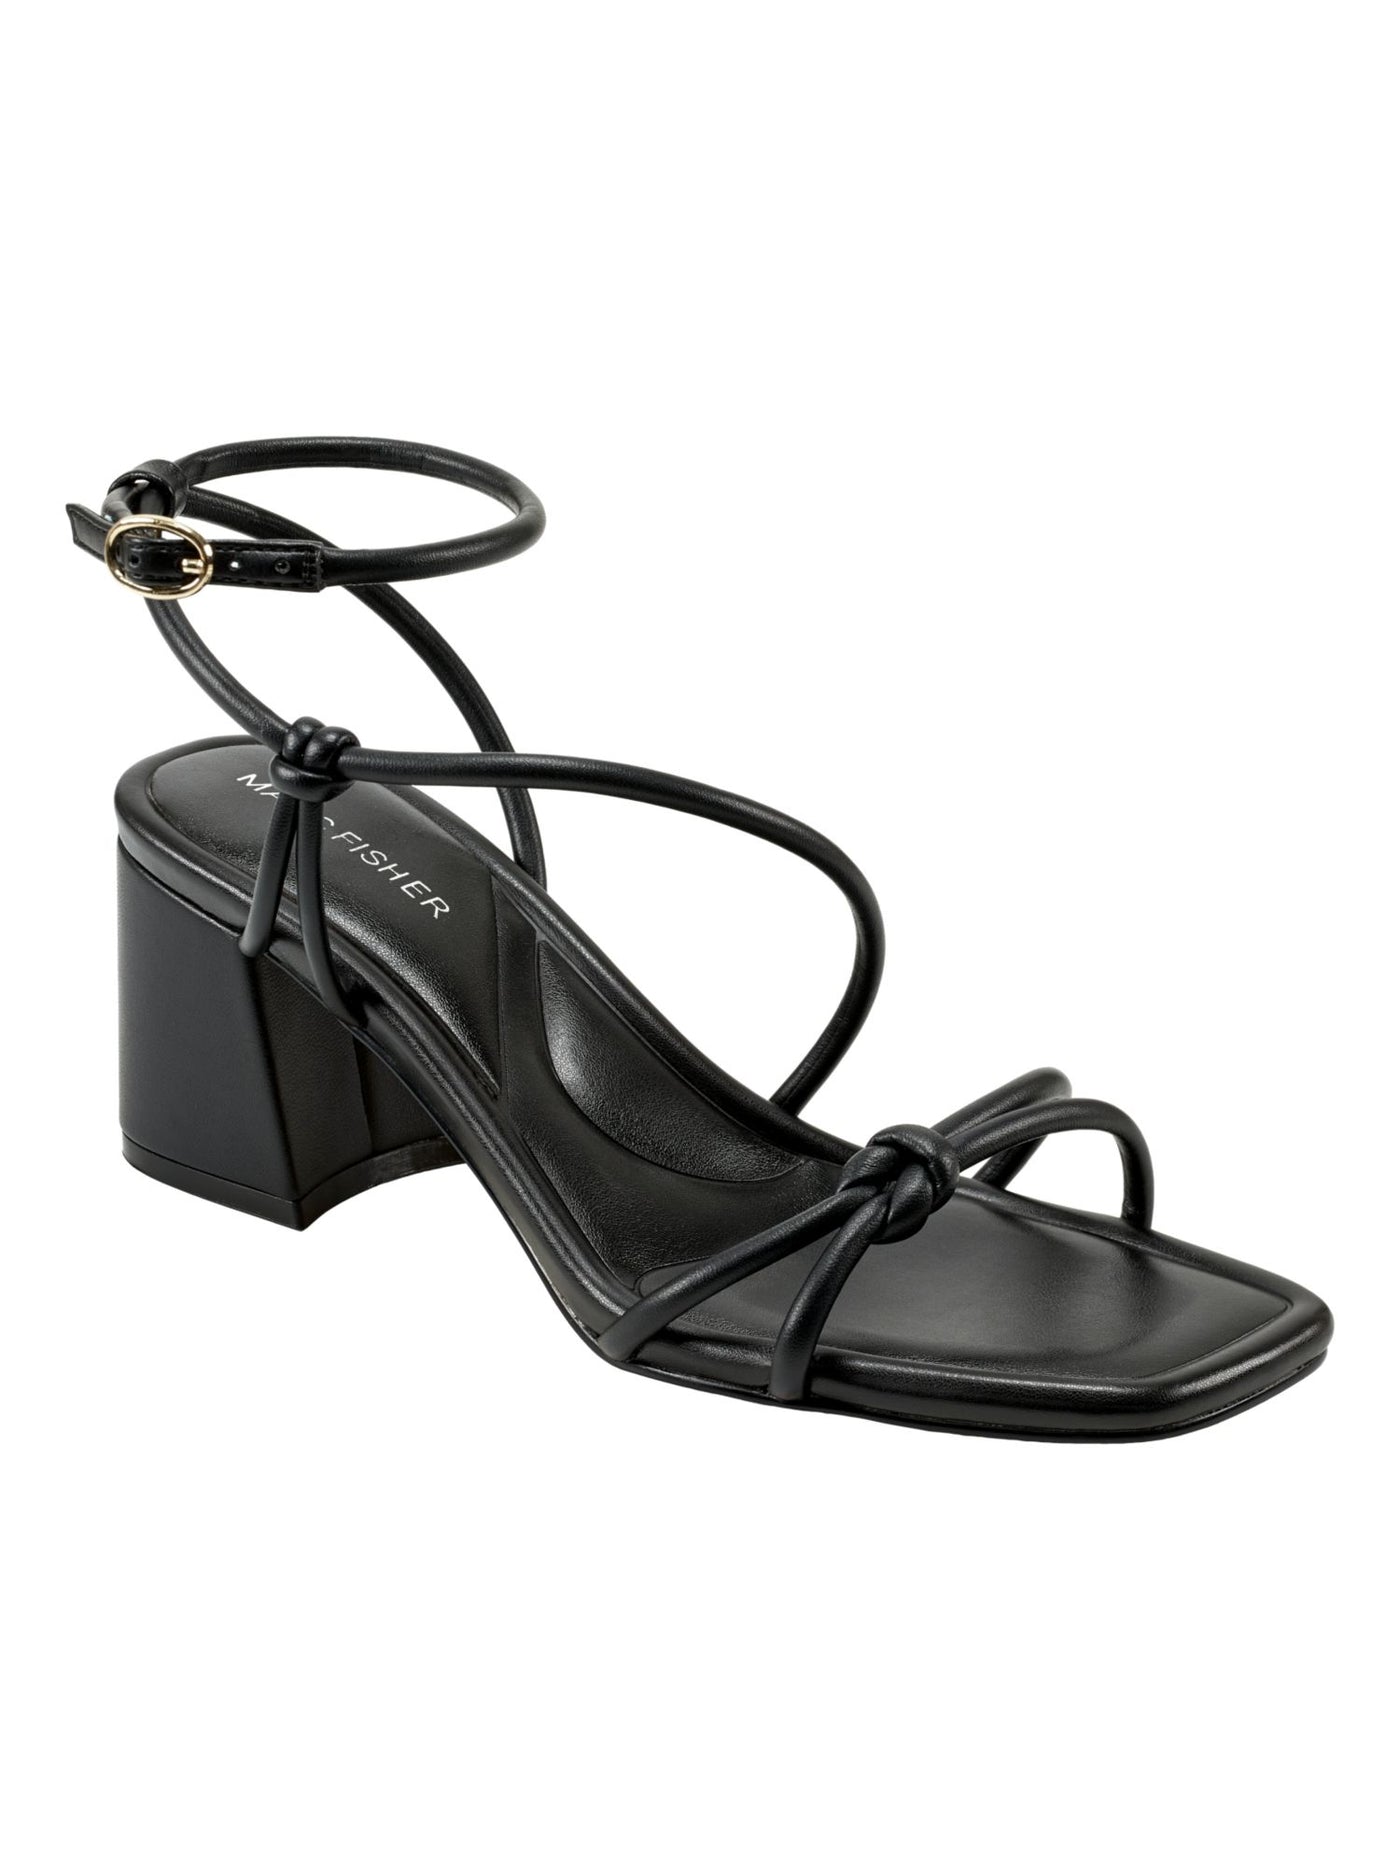 MARC FISHER Womens Black Strappy Knotted Ankle Strap Padded Gurion Square Toe Flare Buckle Heeled Sandal 6.5 M